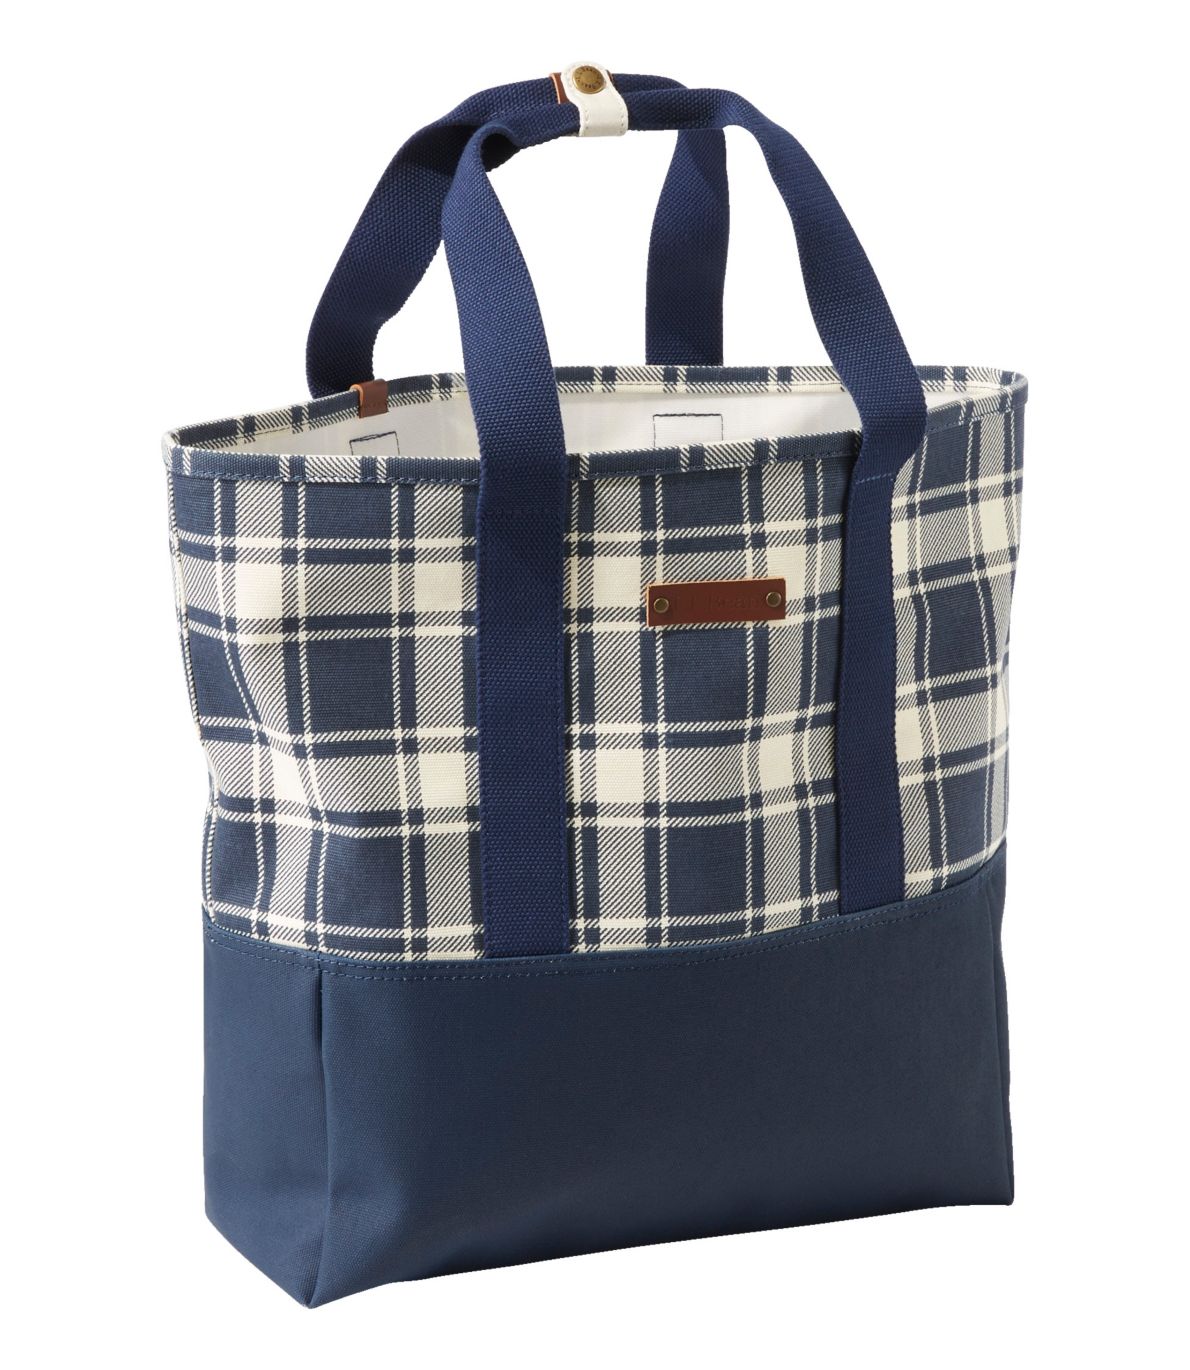 Nor'easter Tote Bag, Open-Top, Print